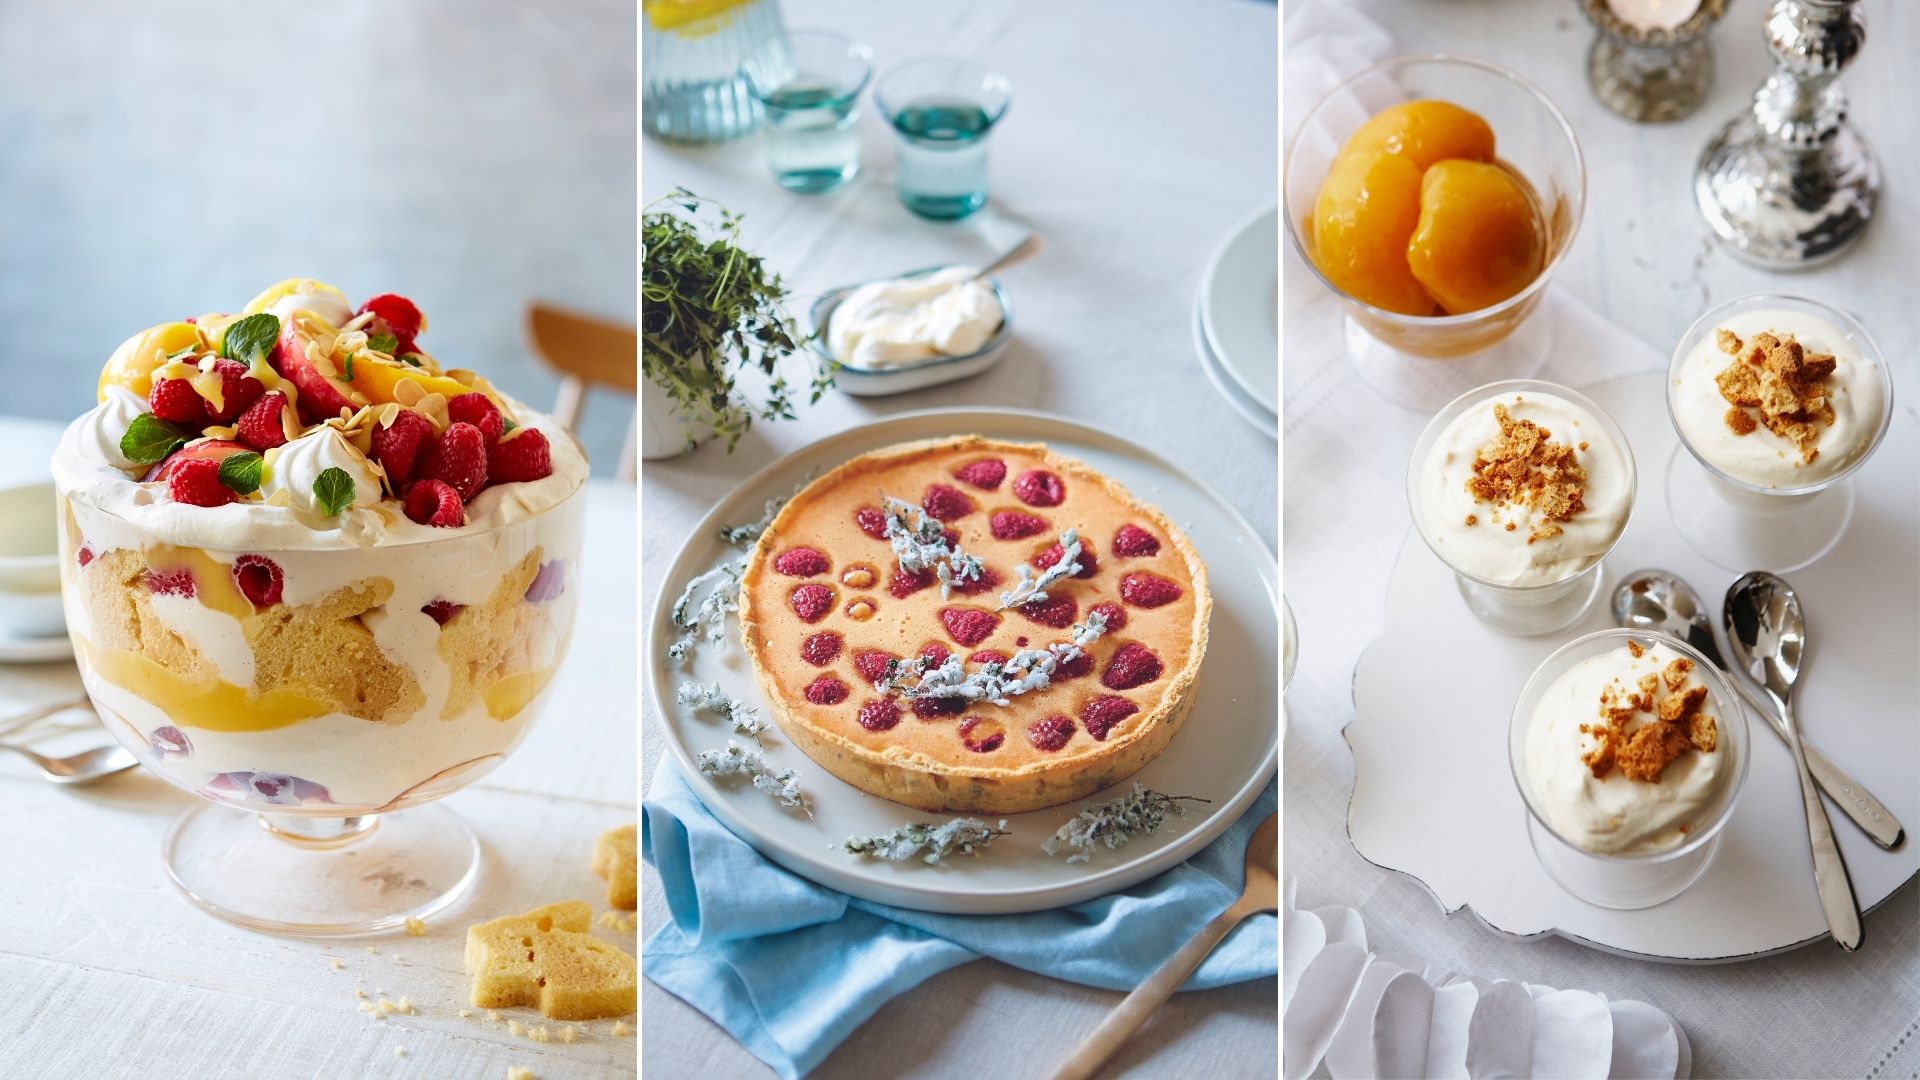 Dinner Party Desserts: Your guide to easy dessert recipes | Woman & Home